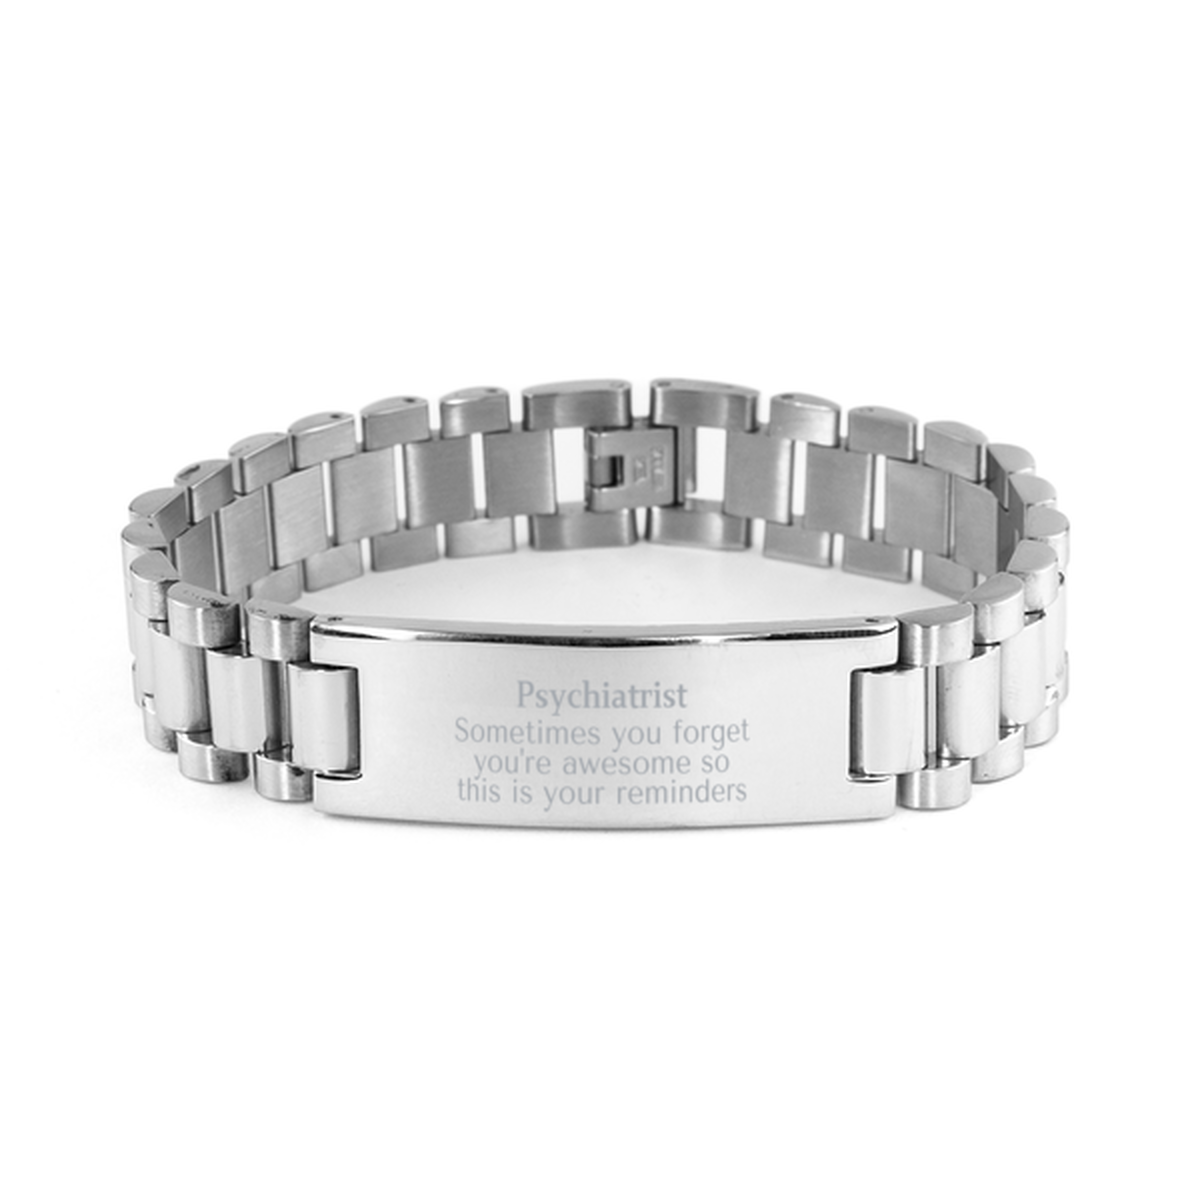 Sentimental Psychiatrist Ladder Stainless Steel Bracelet, Psychiatrist Sometimes you forget you're awesome so this is your reminders, Graduation Christmas Birthday Gifts for Psychiatrist, Men, Women, Coworkers